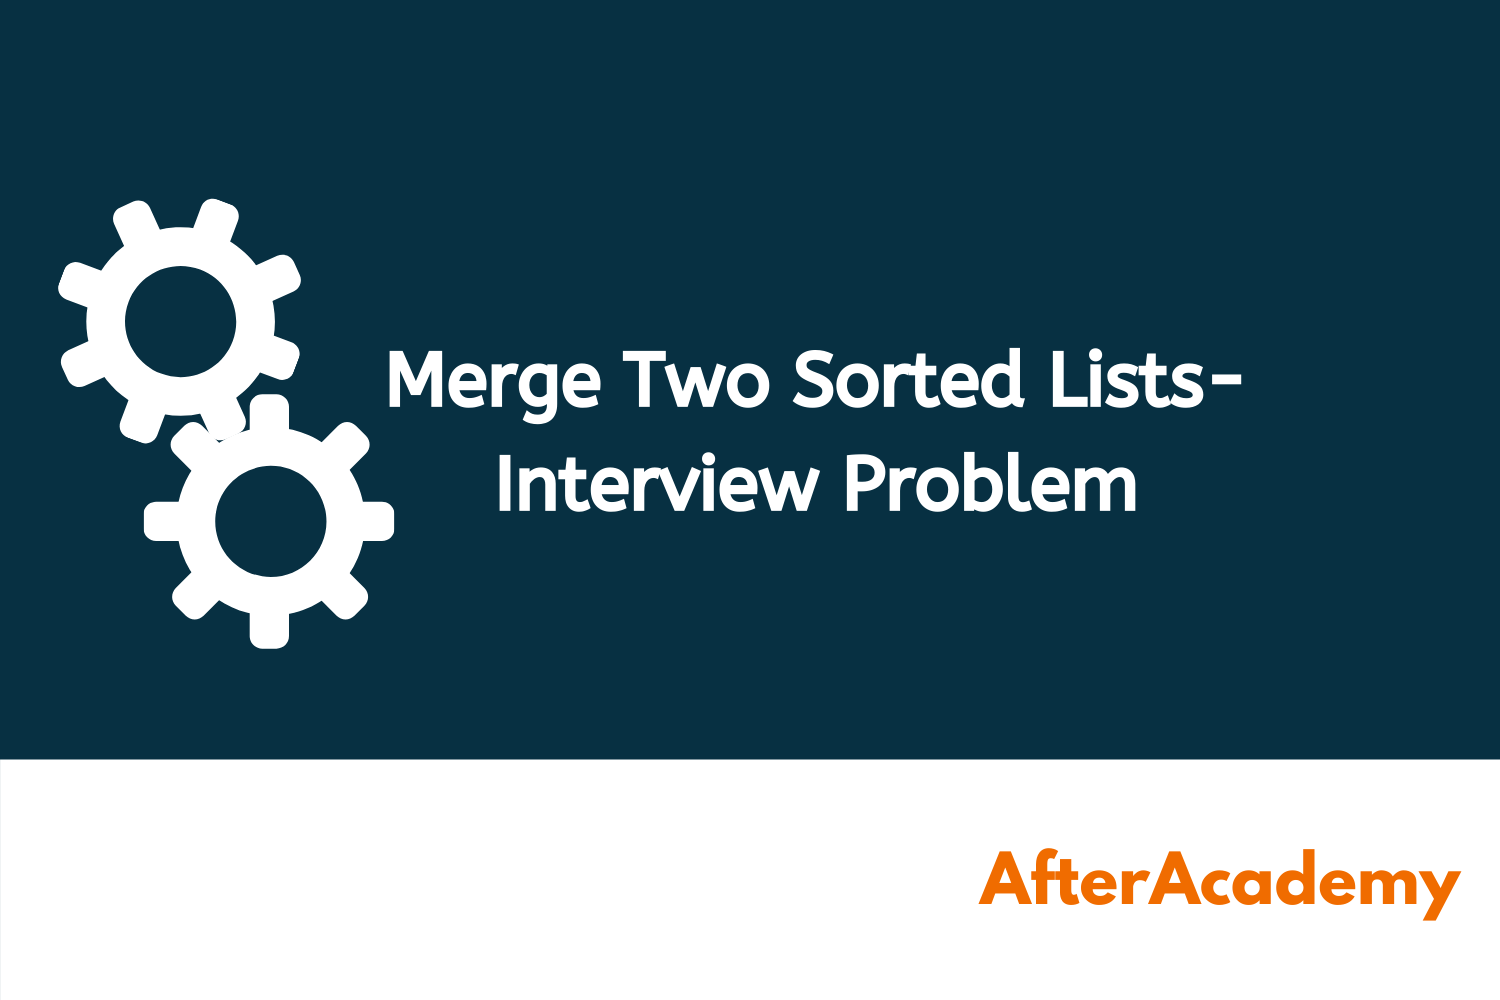 Merge Two Sorted Lists - Interview Problem